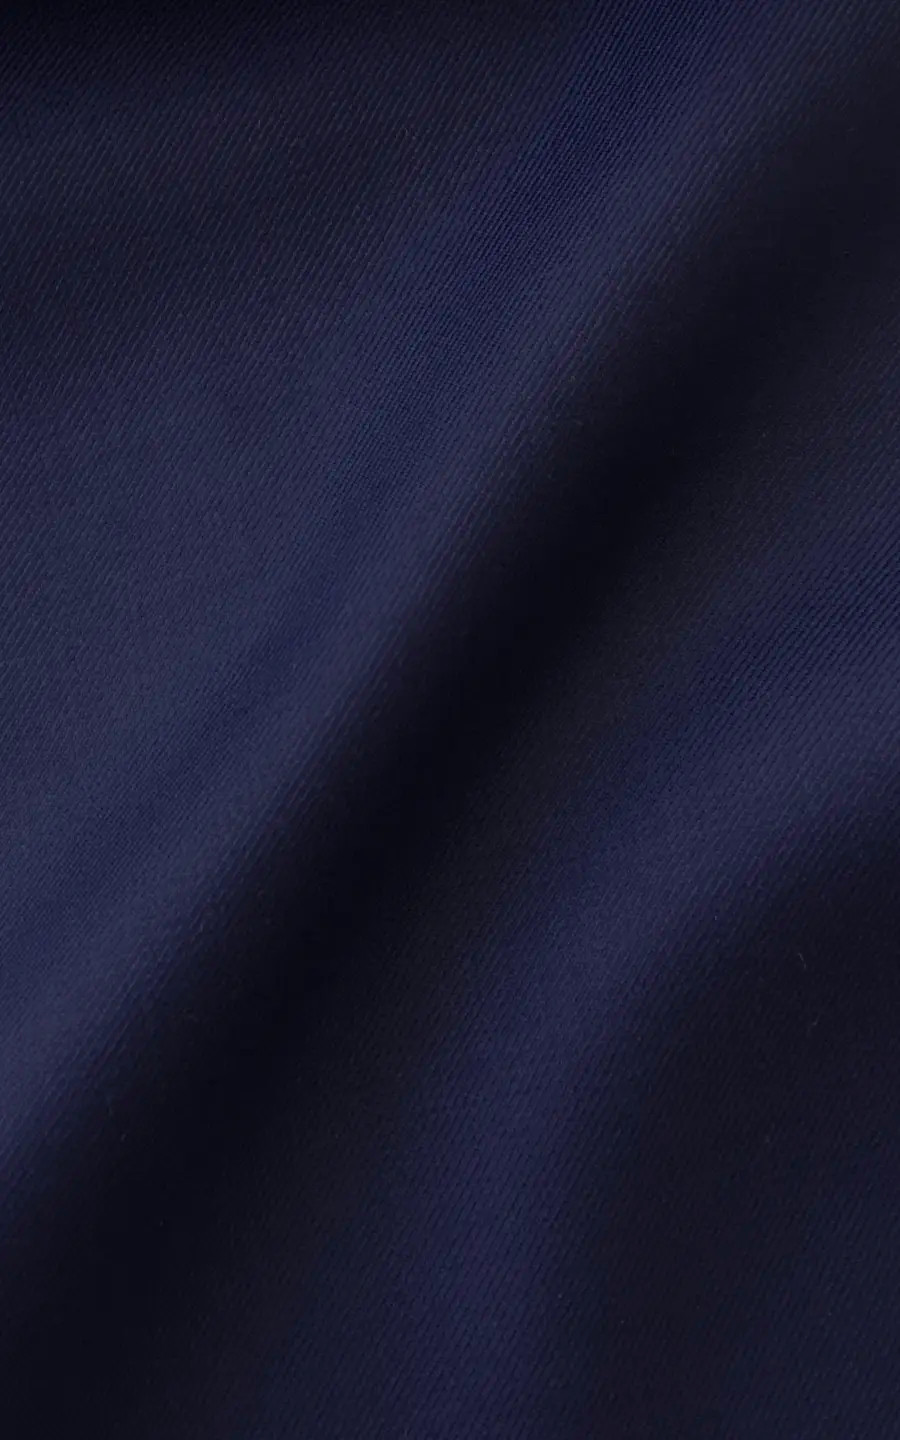 Buy Navy-Blue Blue Combo of 2 Solid Cotton Slub for Best Price, Reviews,  Free Shipping